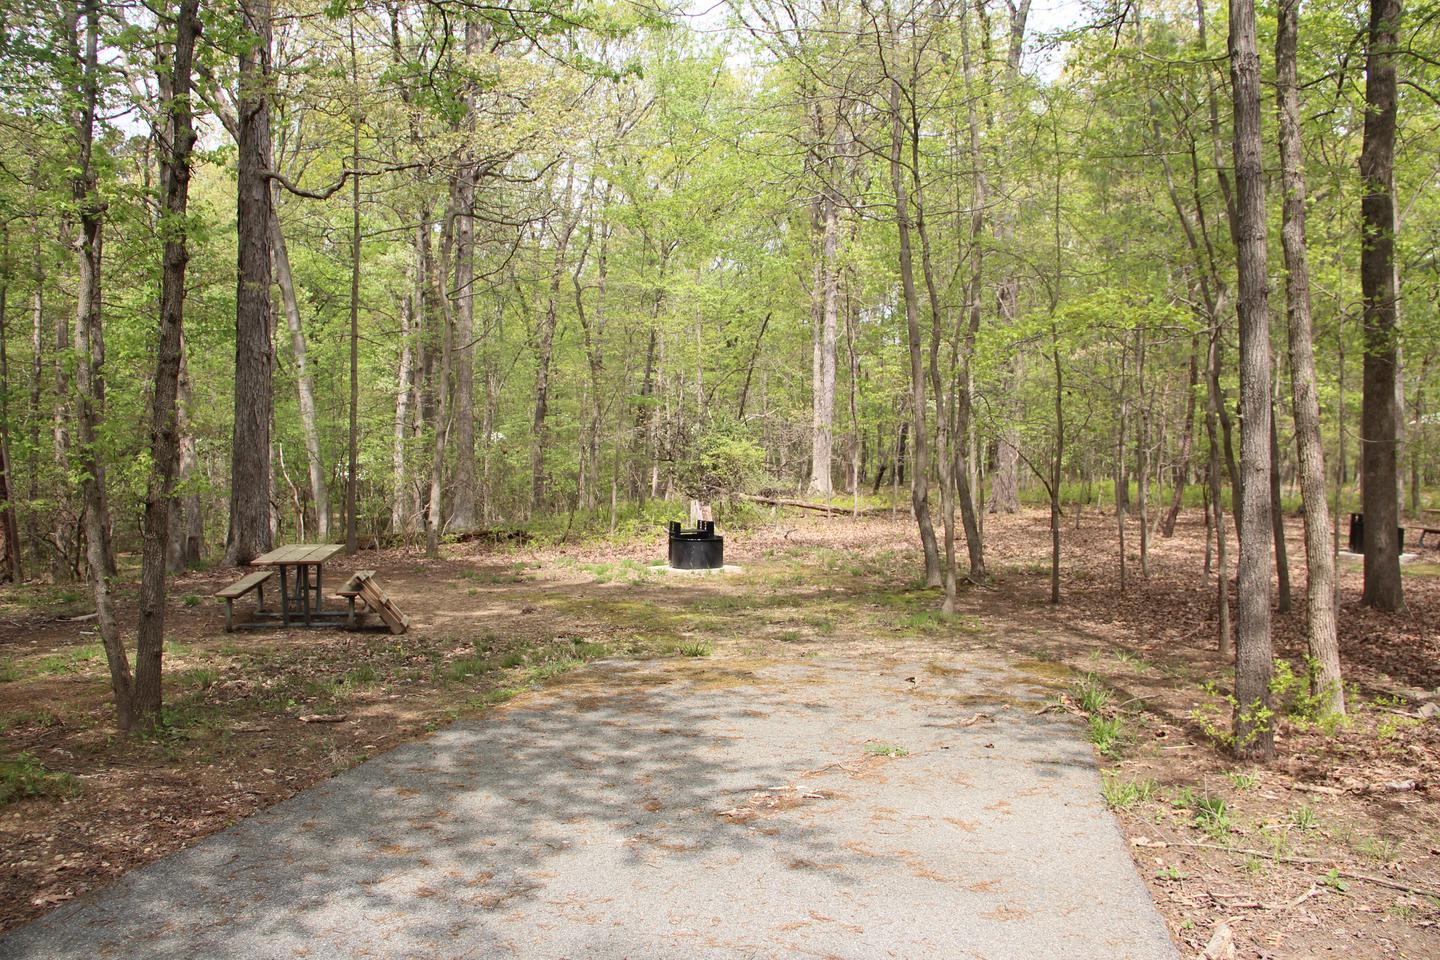 C103 C Loop of the Greenbelt Park Maryland campground